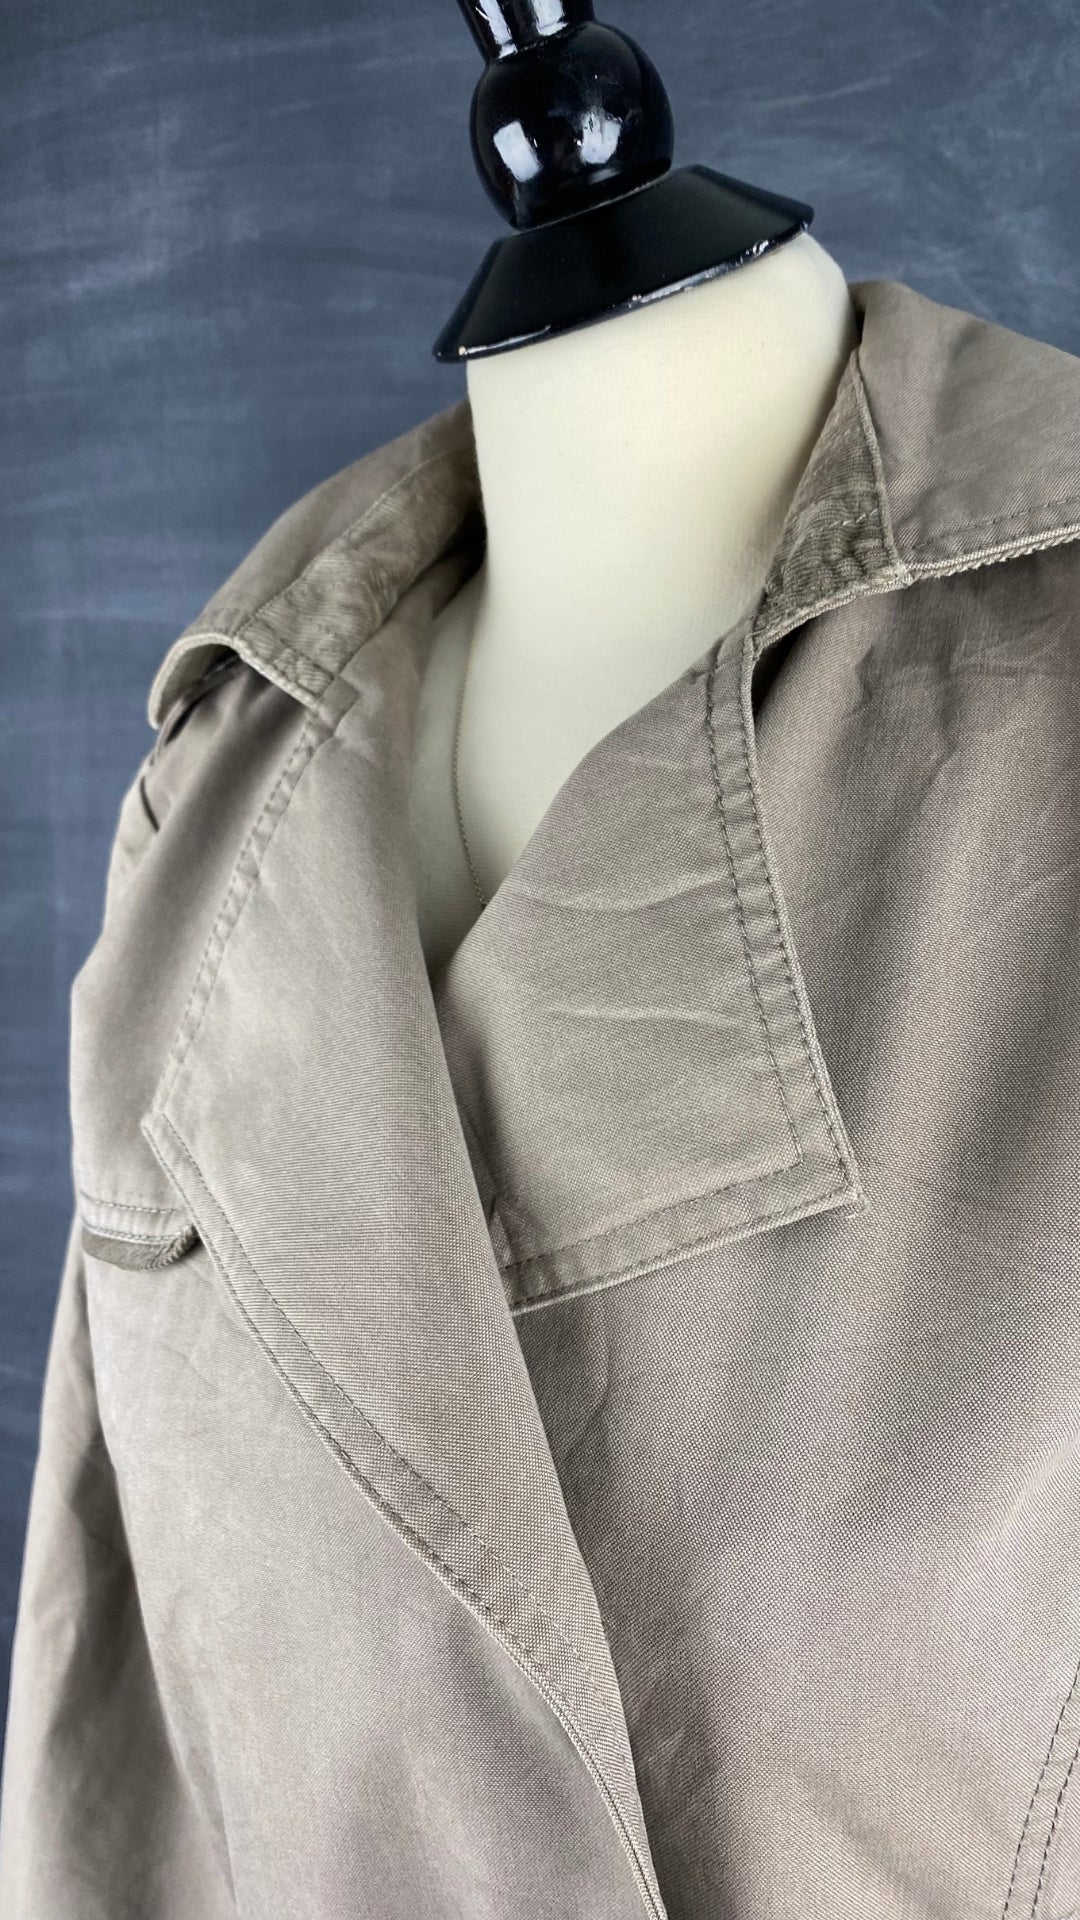 Trench neuf taupe Tom Tailor taille small. Vue de l'encolure.